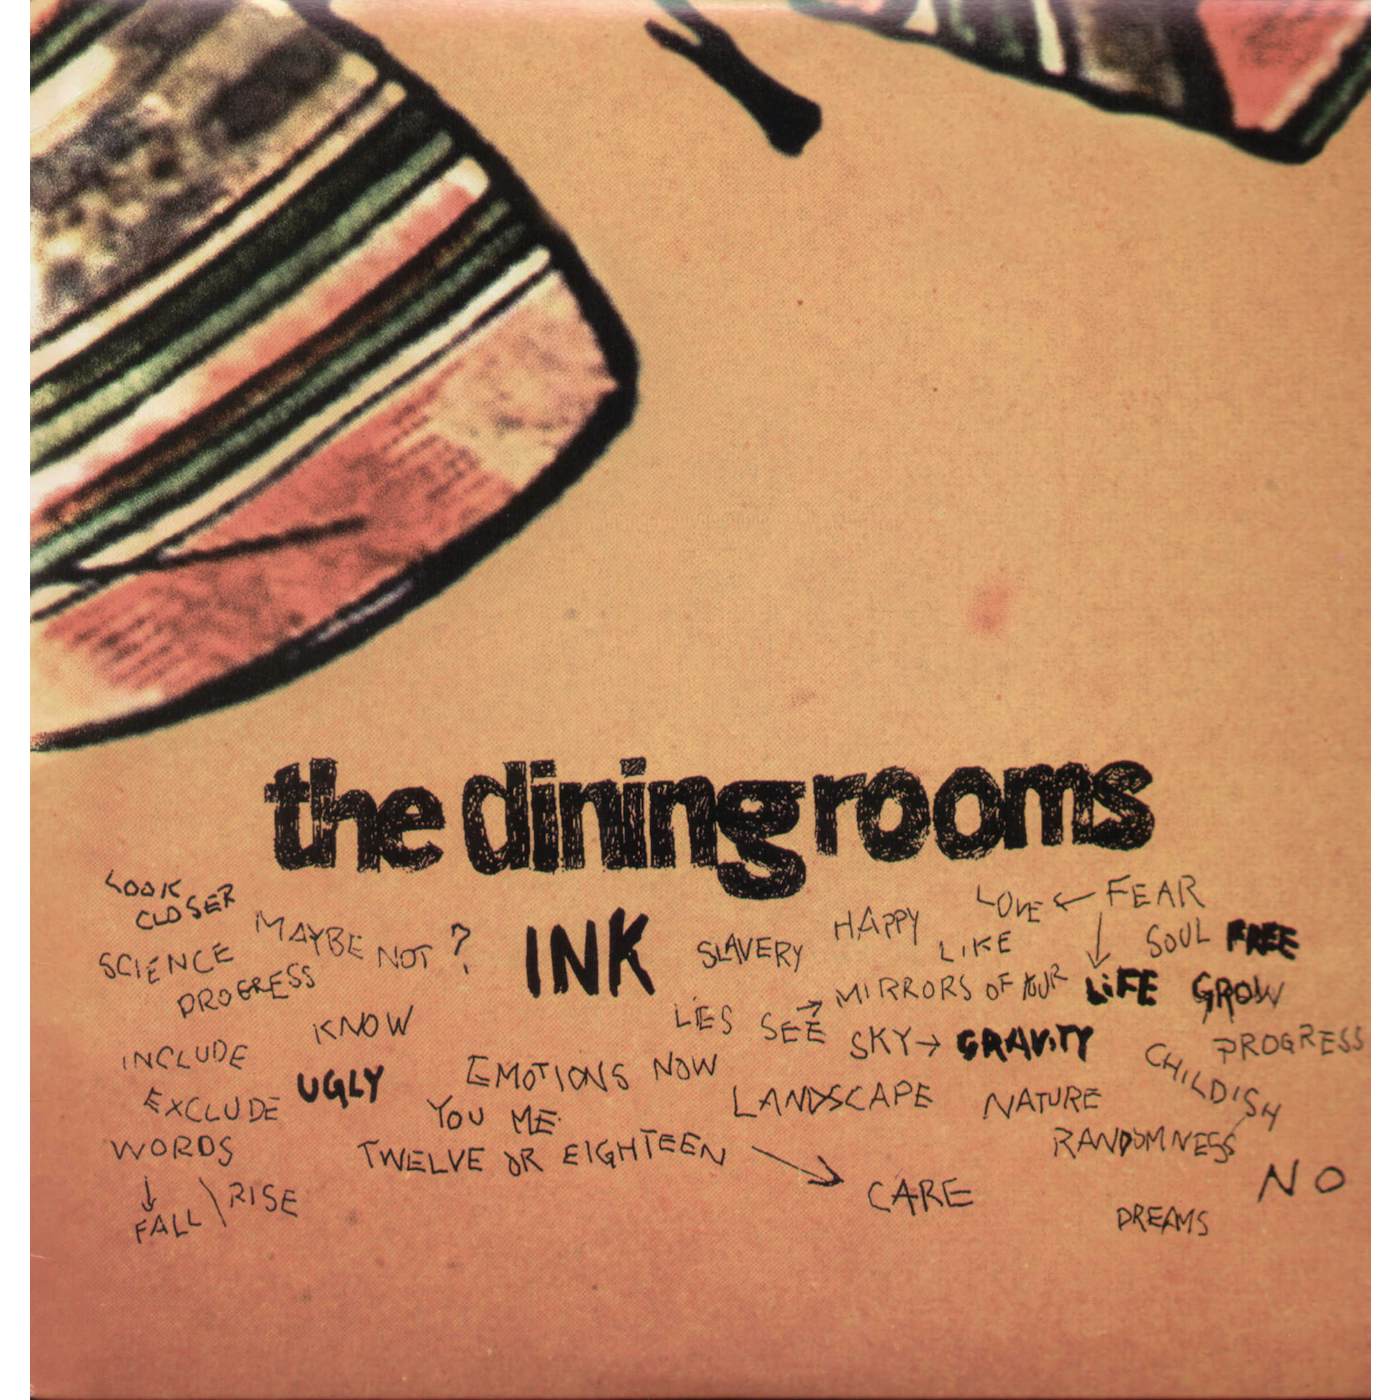 The Dining Rooms Ink Vinyl Record